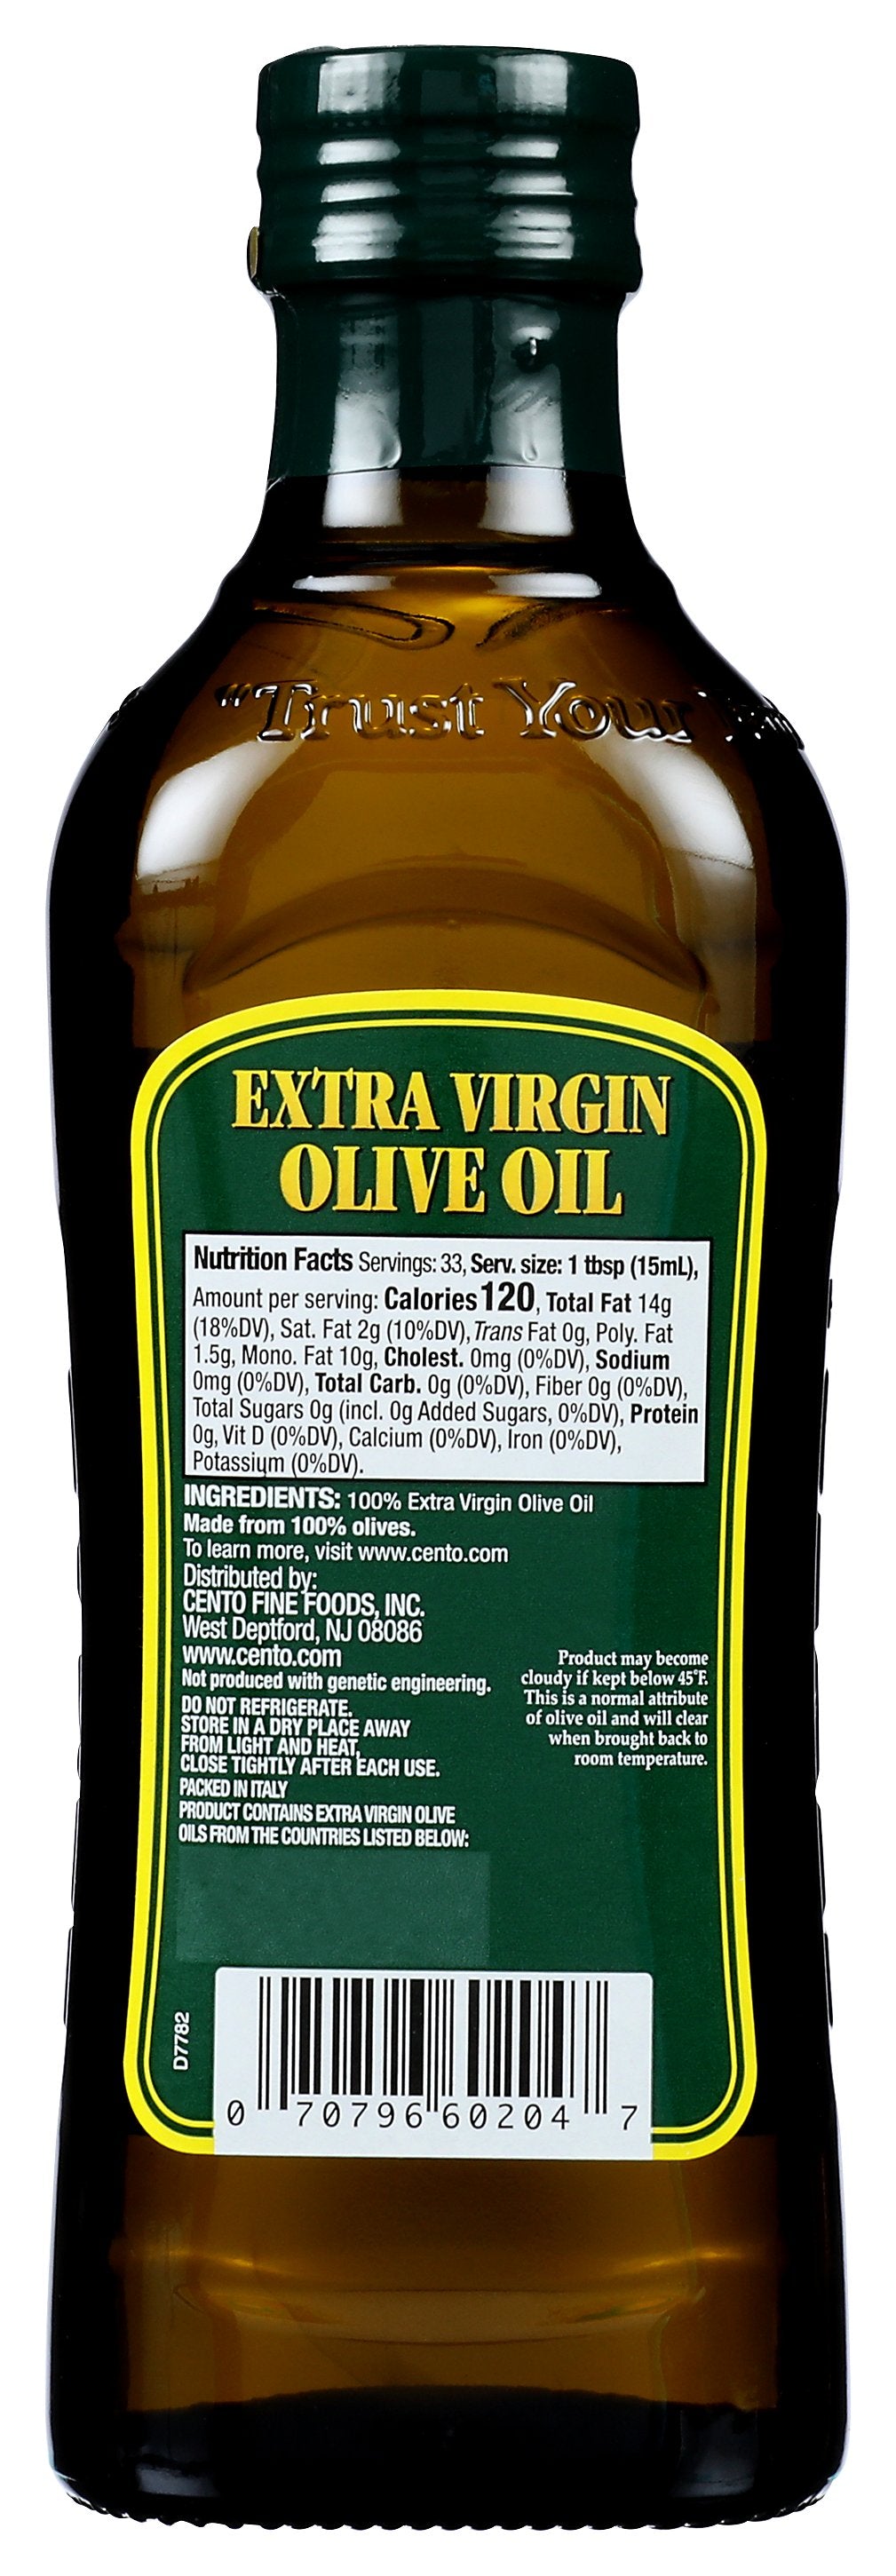 CENTO OIL OLIVE XVRGN - Case of 6